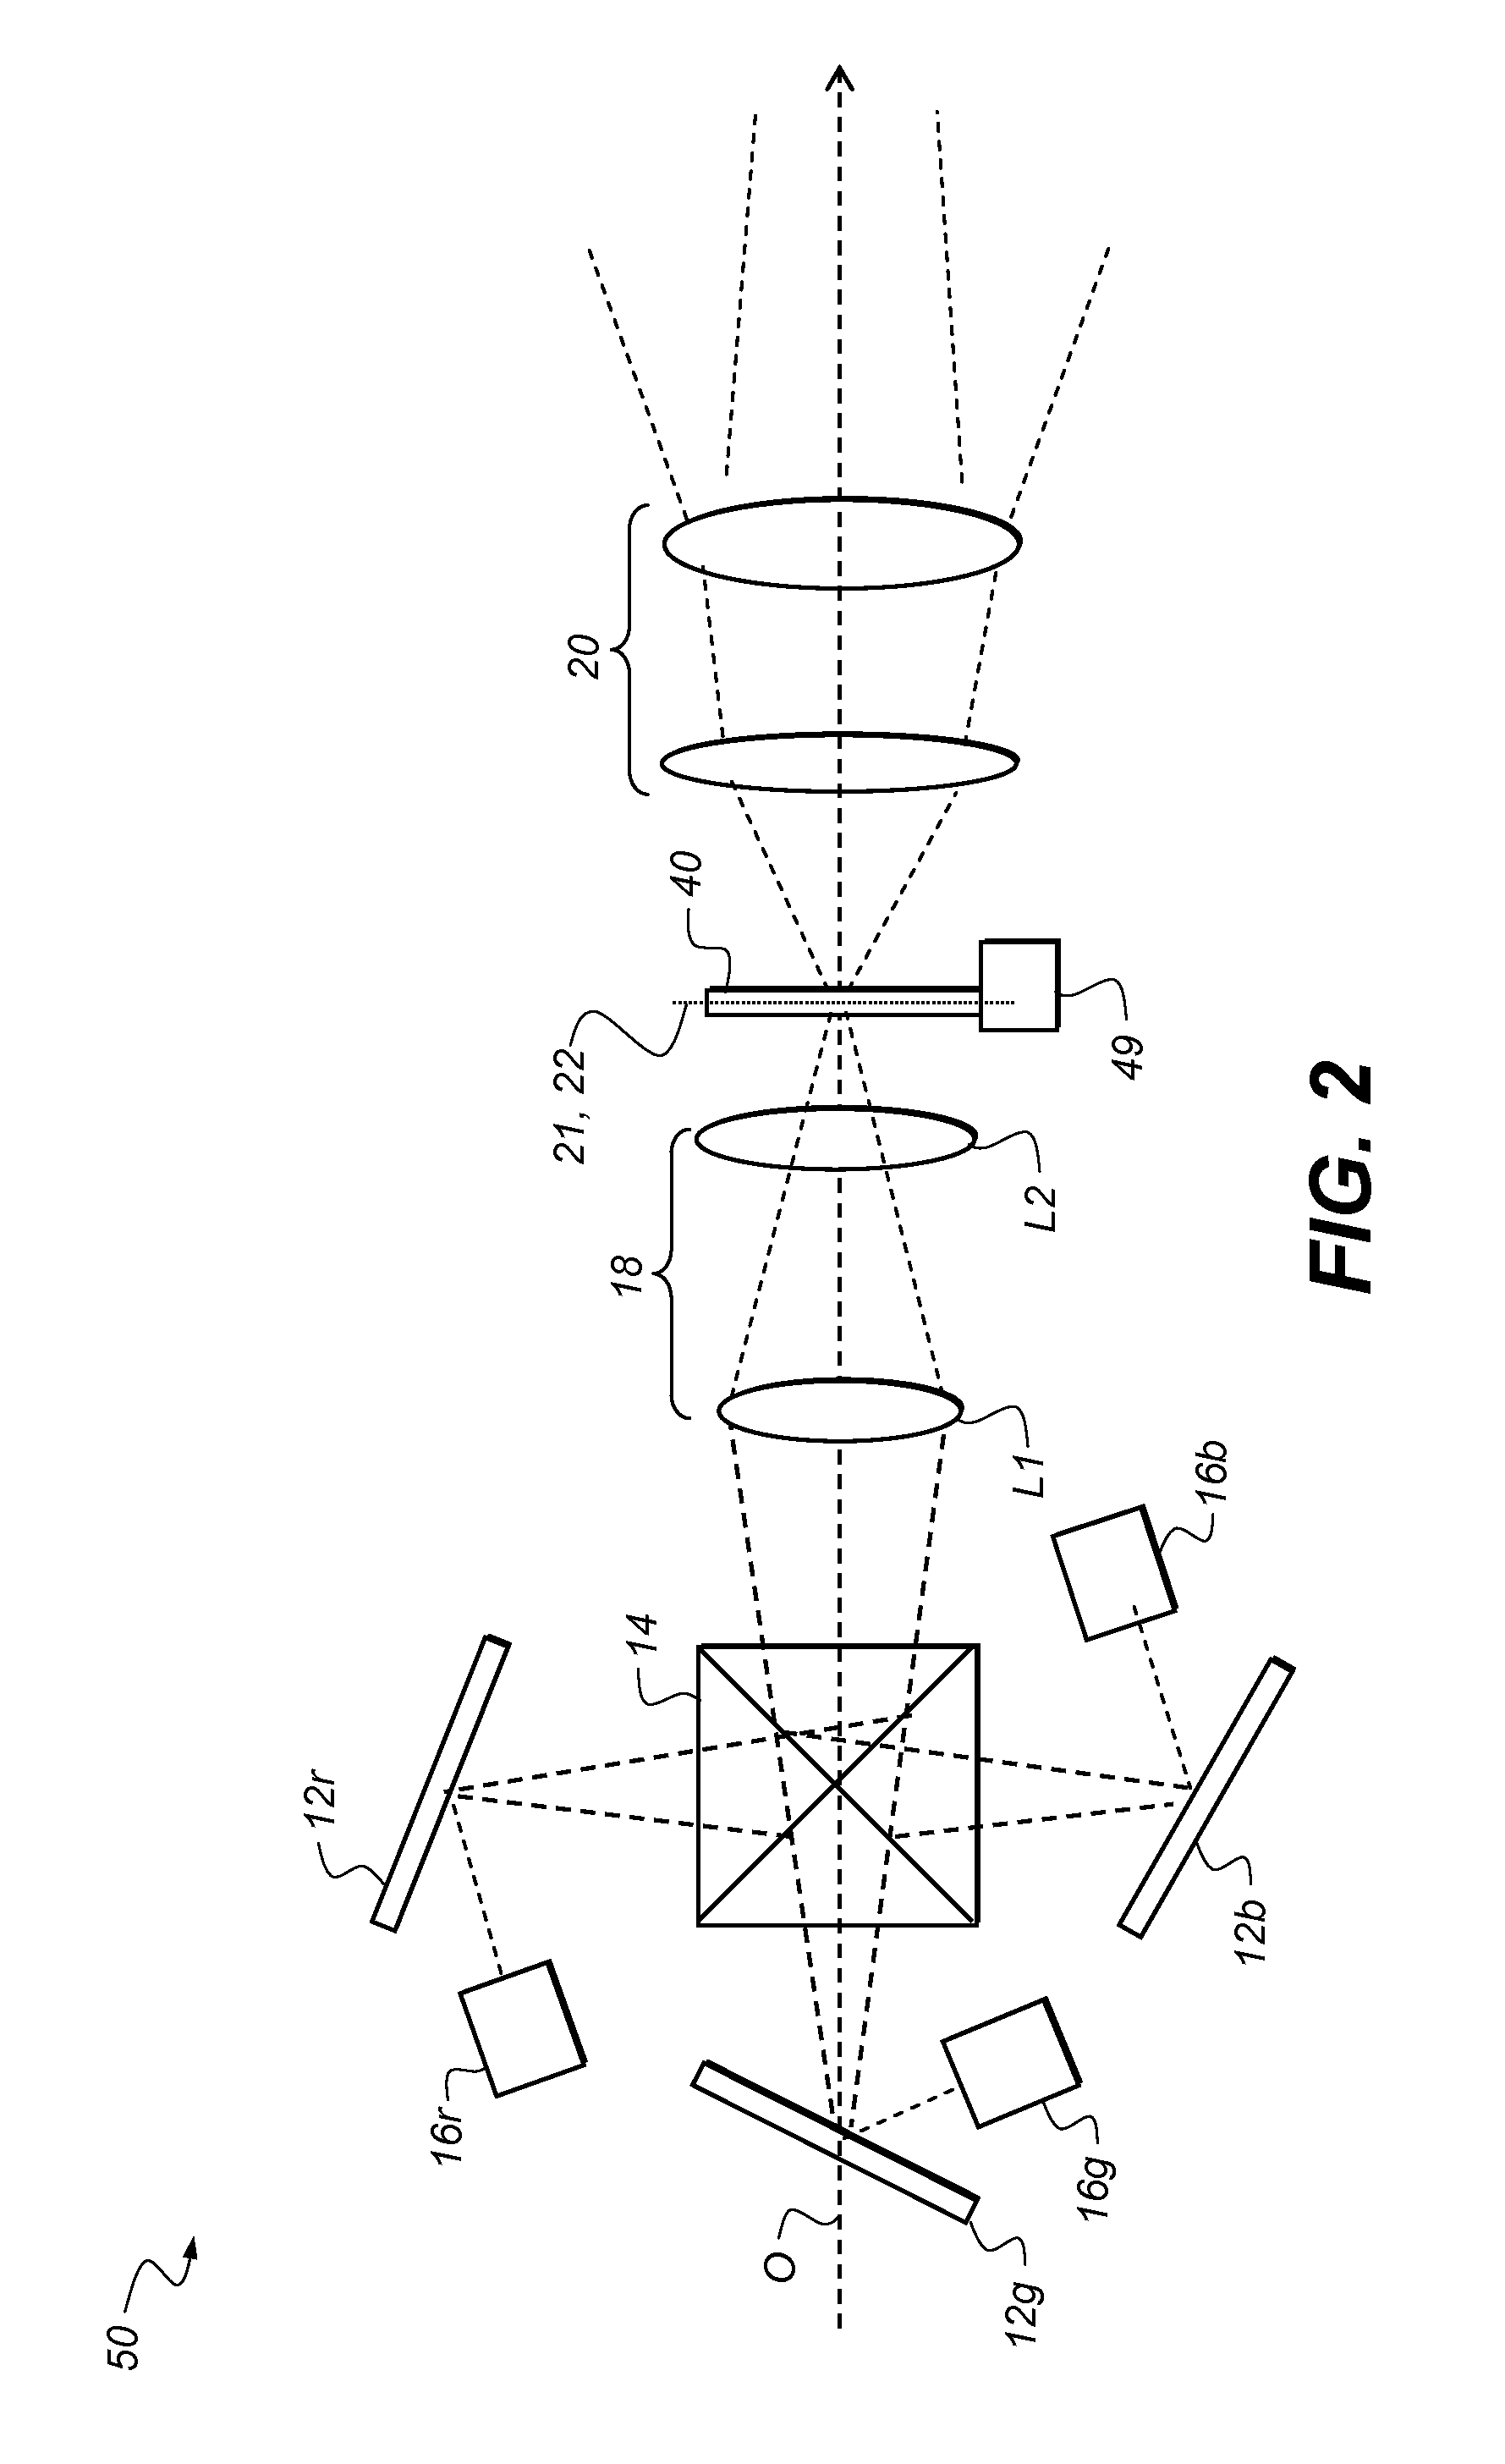 Out-of-plane motion of speckle reduction element